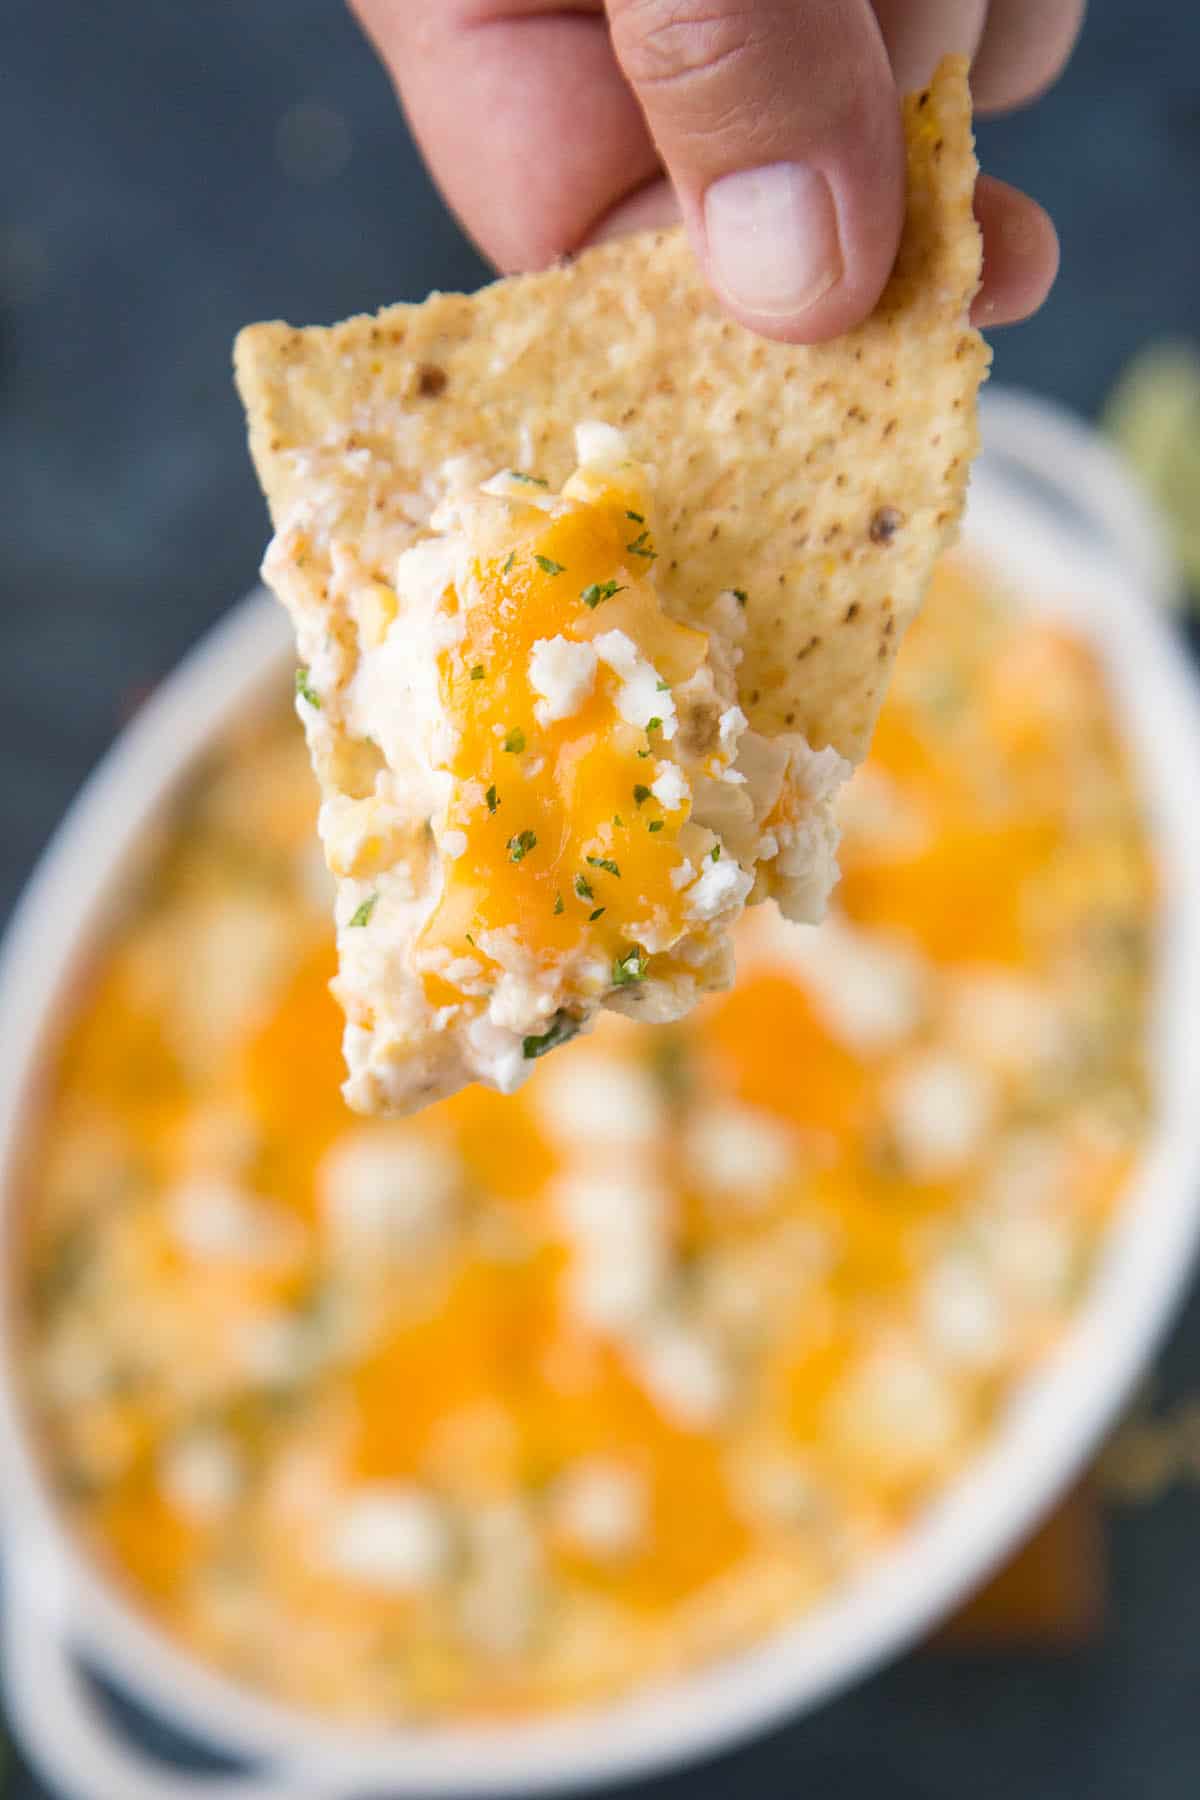 Serve this Mexican Corn Dip with Corn Chips